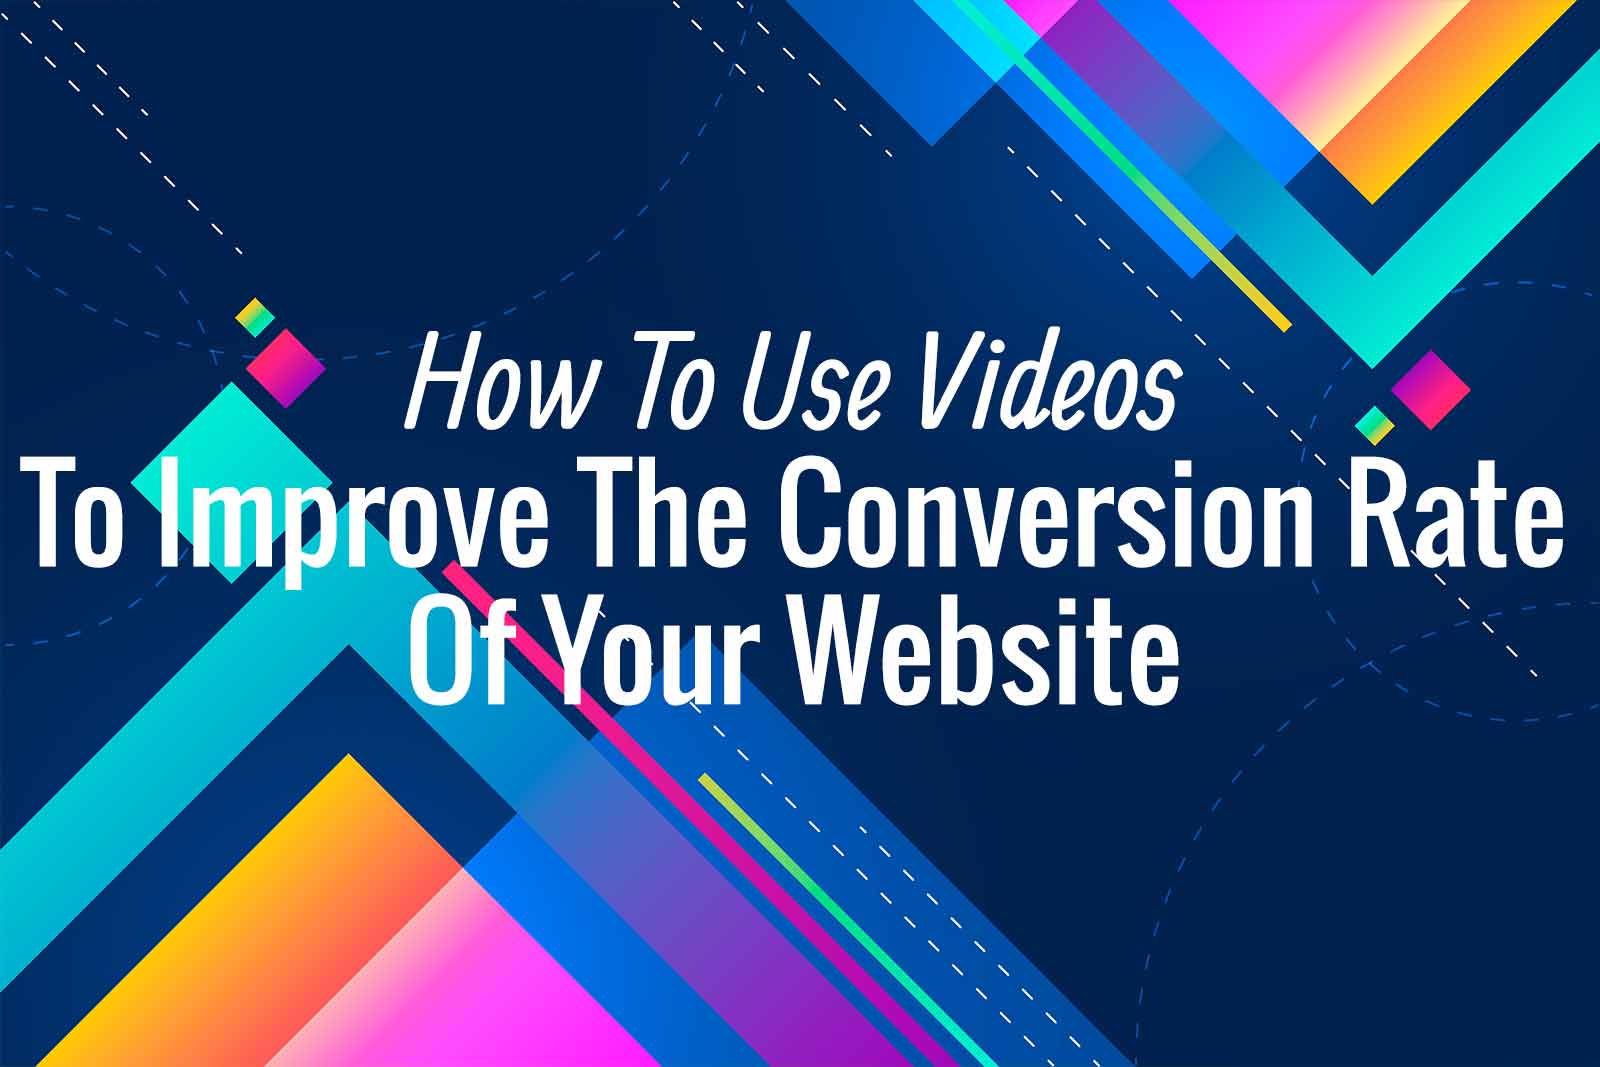 Does Video Increase the Conversion Rate of Your Website?